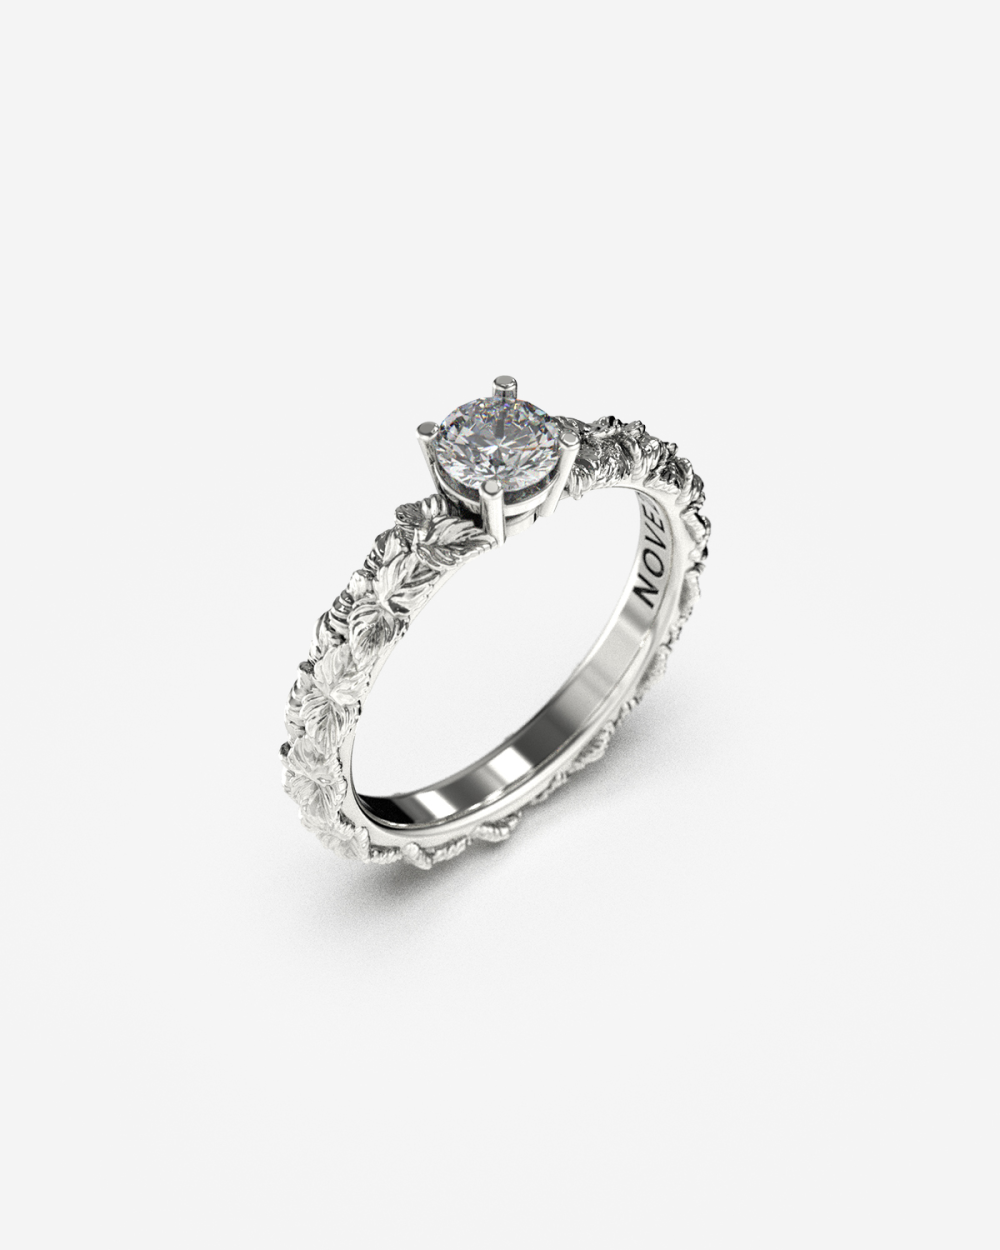 SILVER LEAVES SOLITAIRE ENGAGEMENT RING